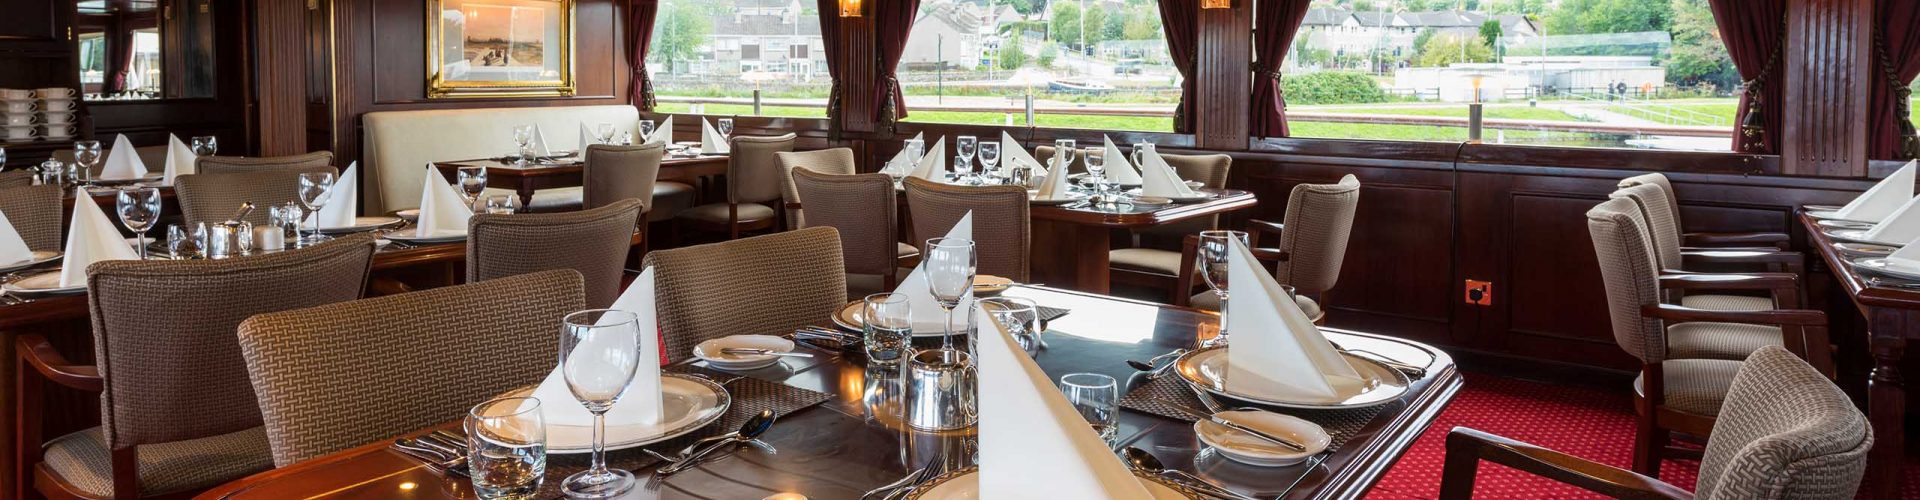 Tables set for dining in the Robert Louis Stevenson Restaurant on the Alexander Graham Bell deck on Lord of the Glens cruise ship